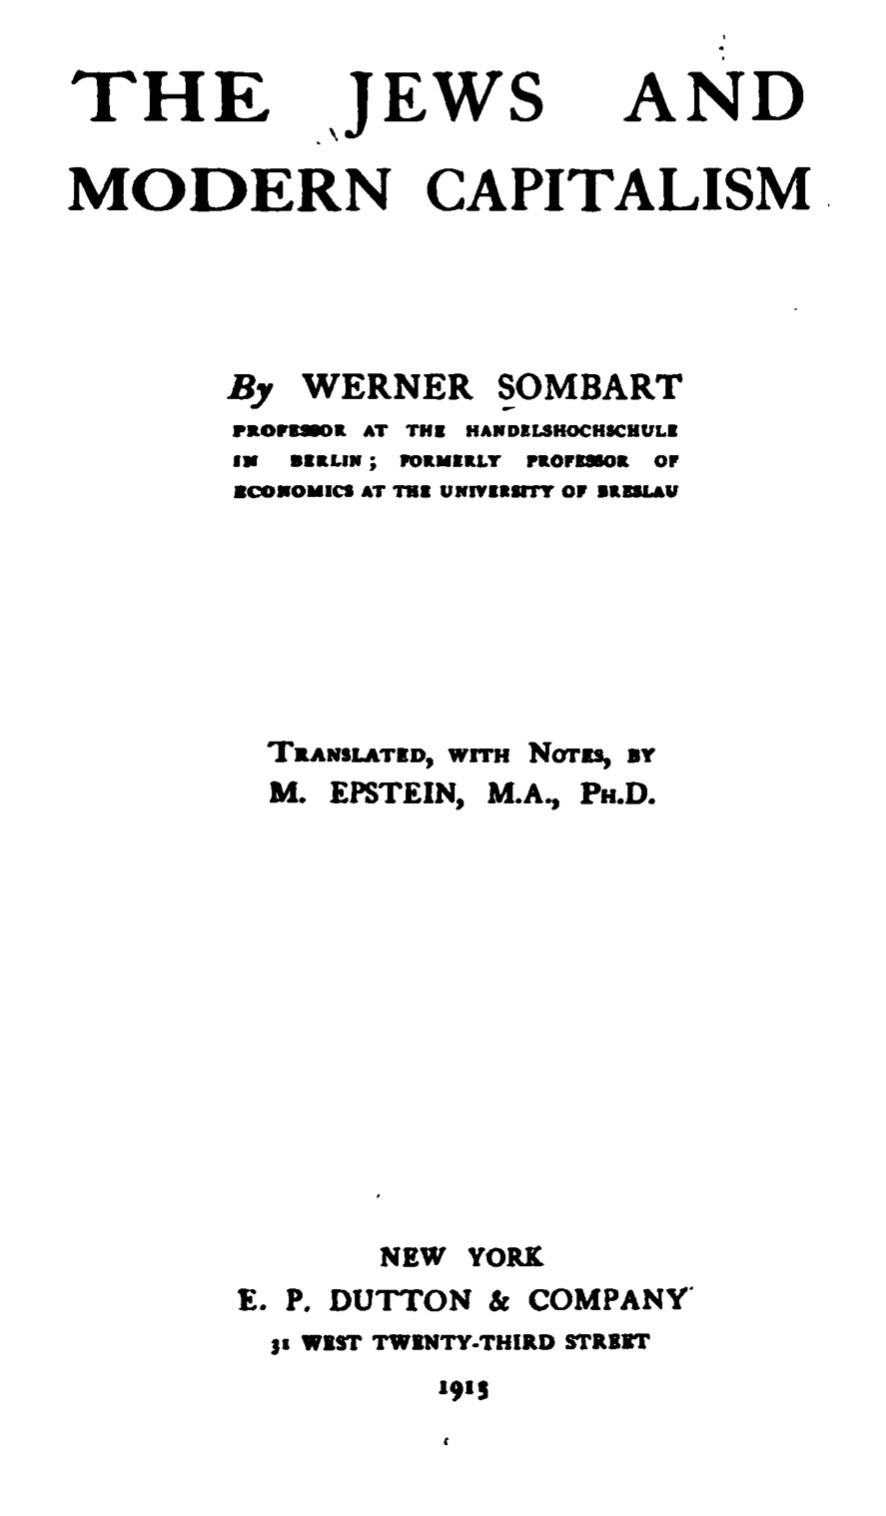 The Jews and Modern Capitalism (1913) by Werner Sombart